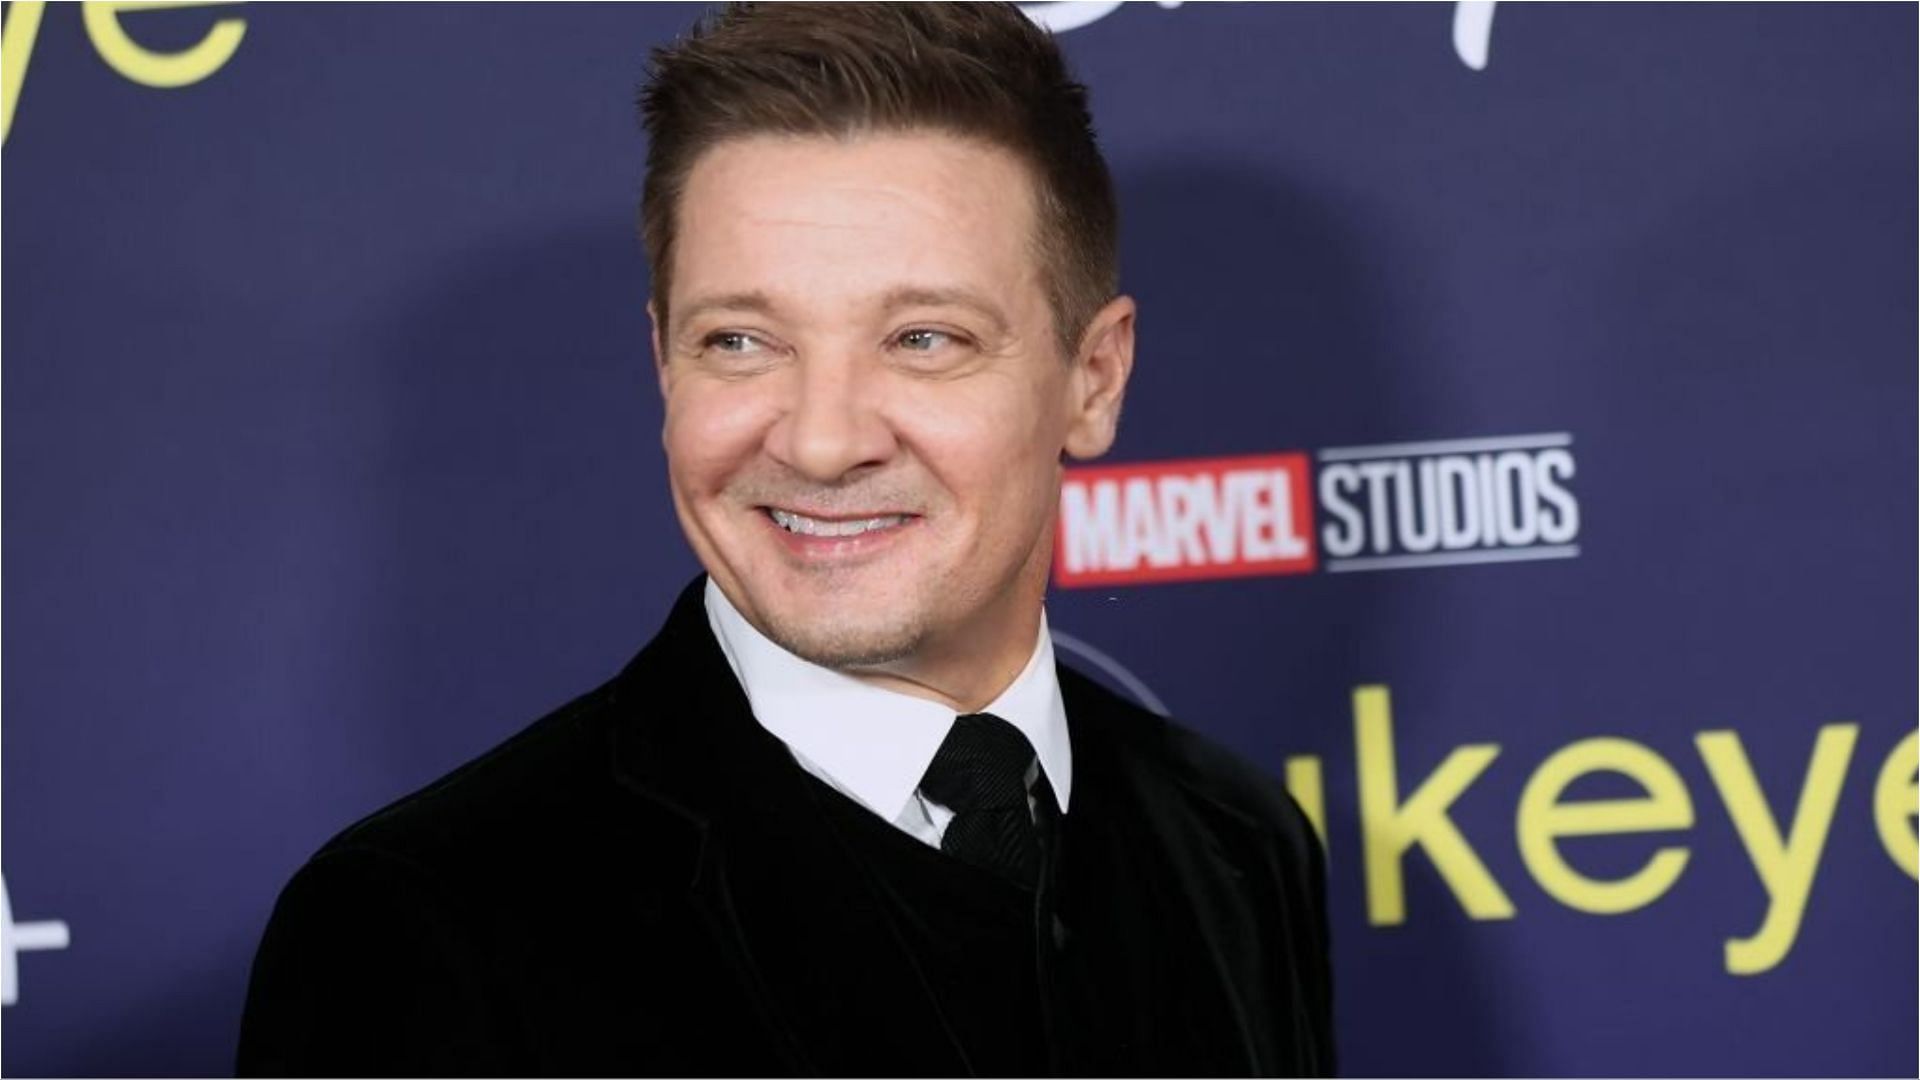 Jeremy Renner met with a snowplow accident on January 1, 2023 (Image via Matt Winkelmeyer/Getty Images)